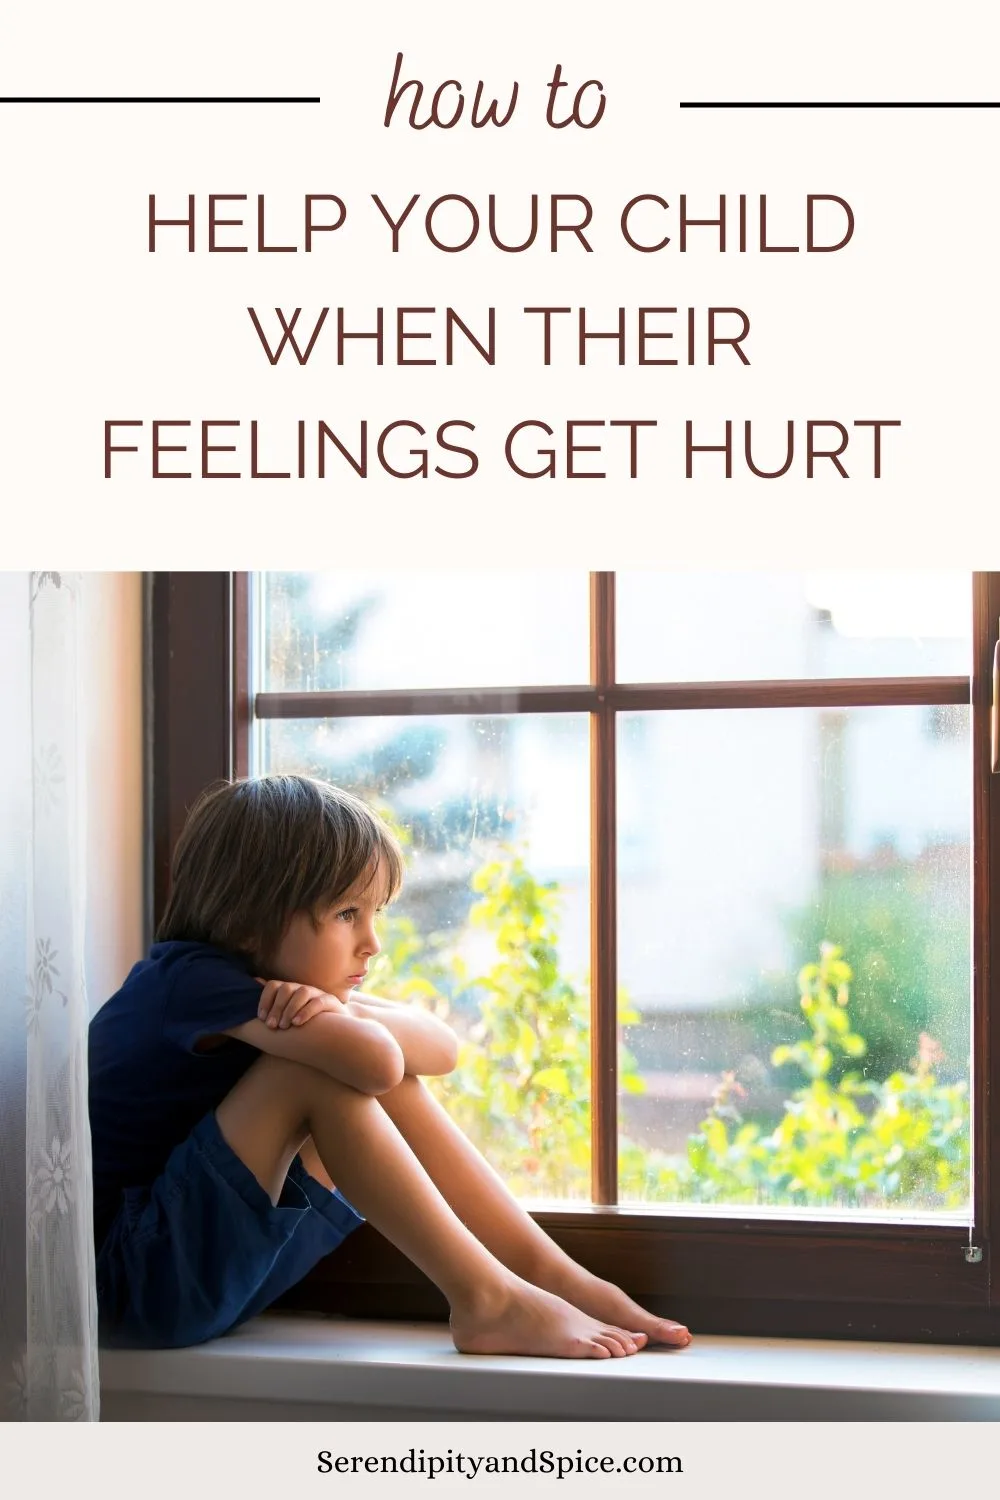 How to Help When Your Child Gets Their Feelings Hurt